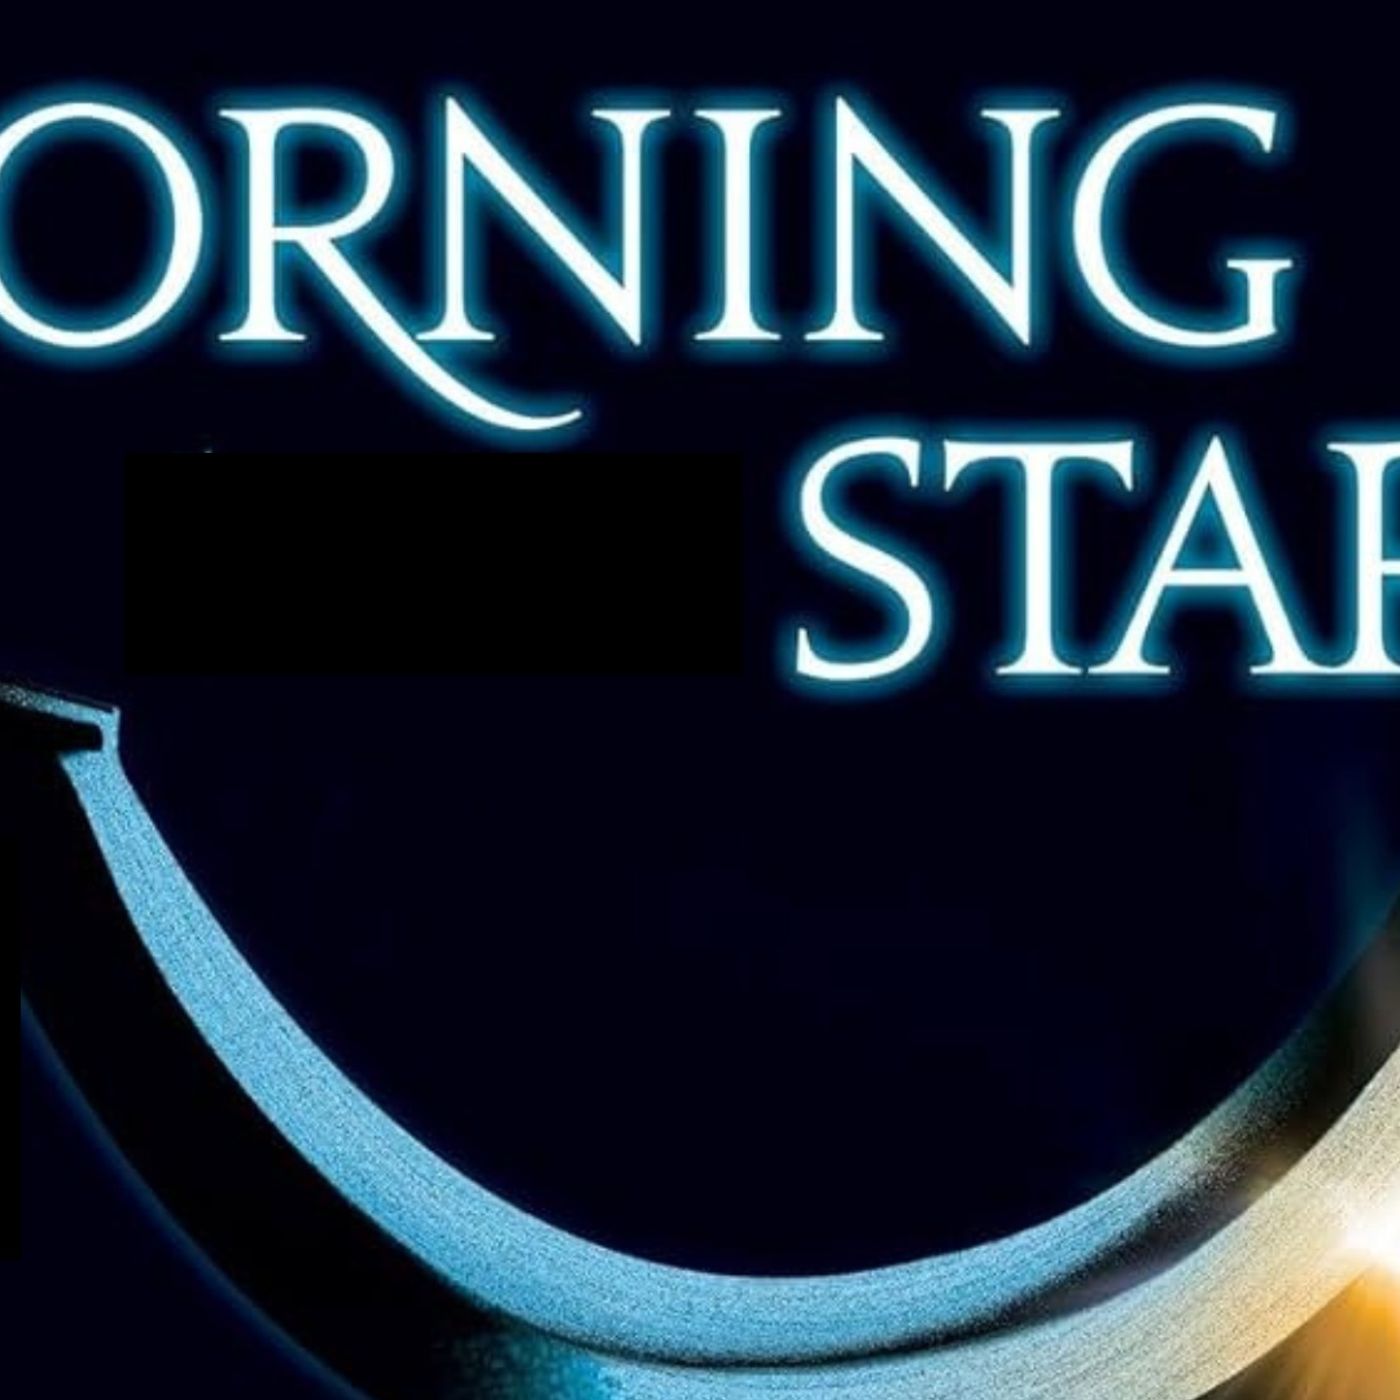 Morning Star, Chapters 1-3